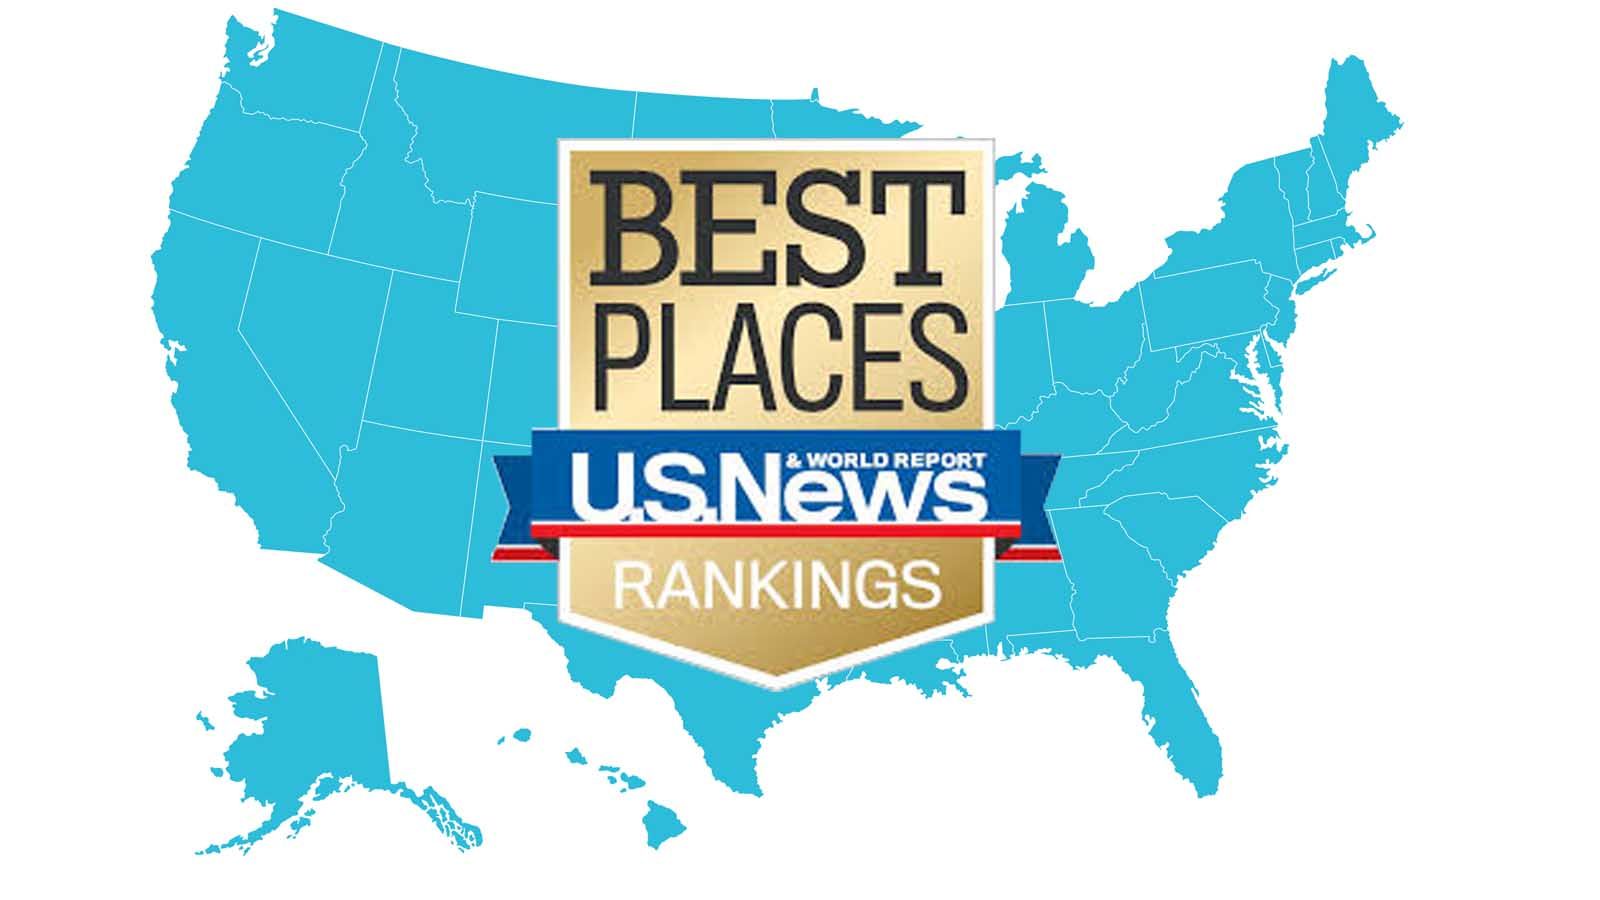 U.S. News published best places to retire in 2018, but is it any good?